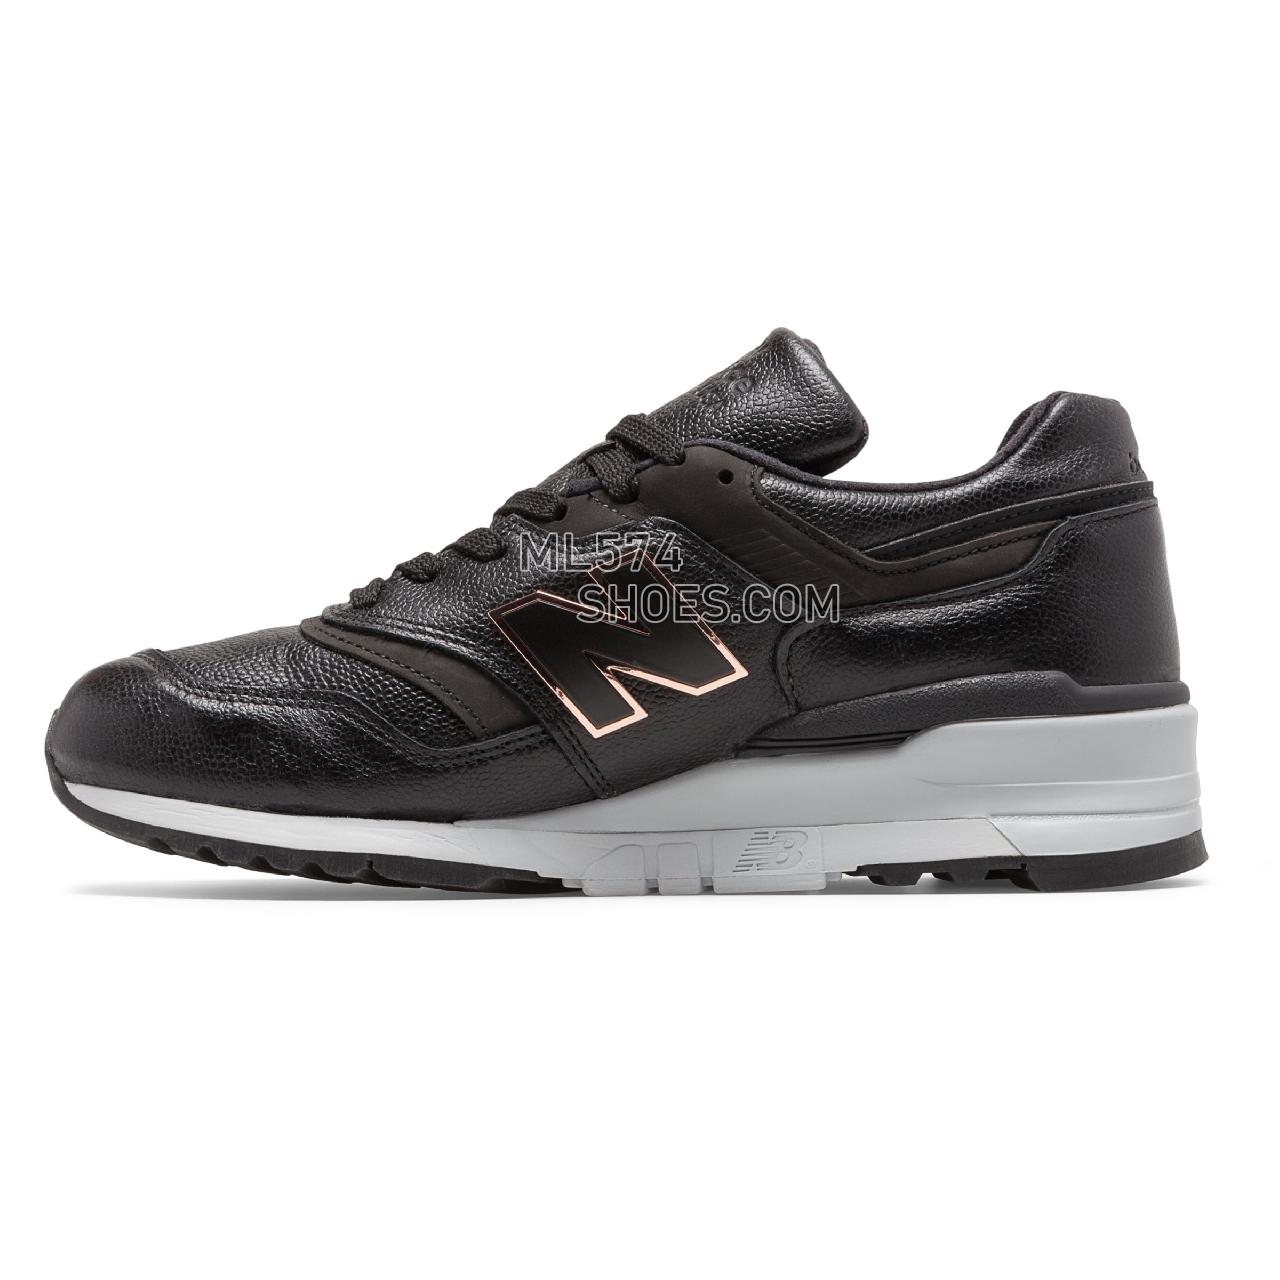 New Balance Made in US 997 - Men's Made in US 997 - Black with Grey - M997PAF